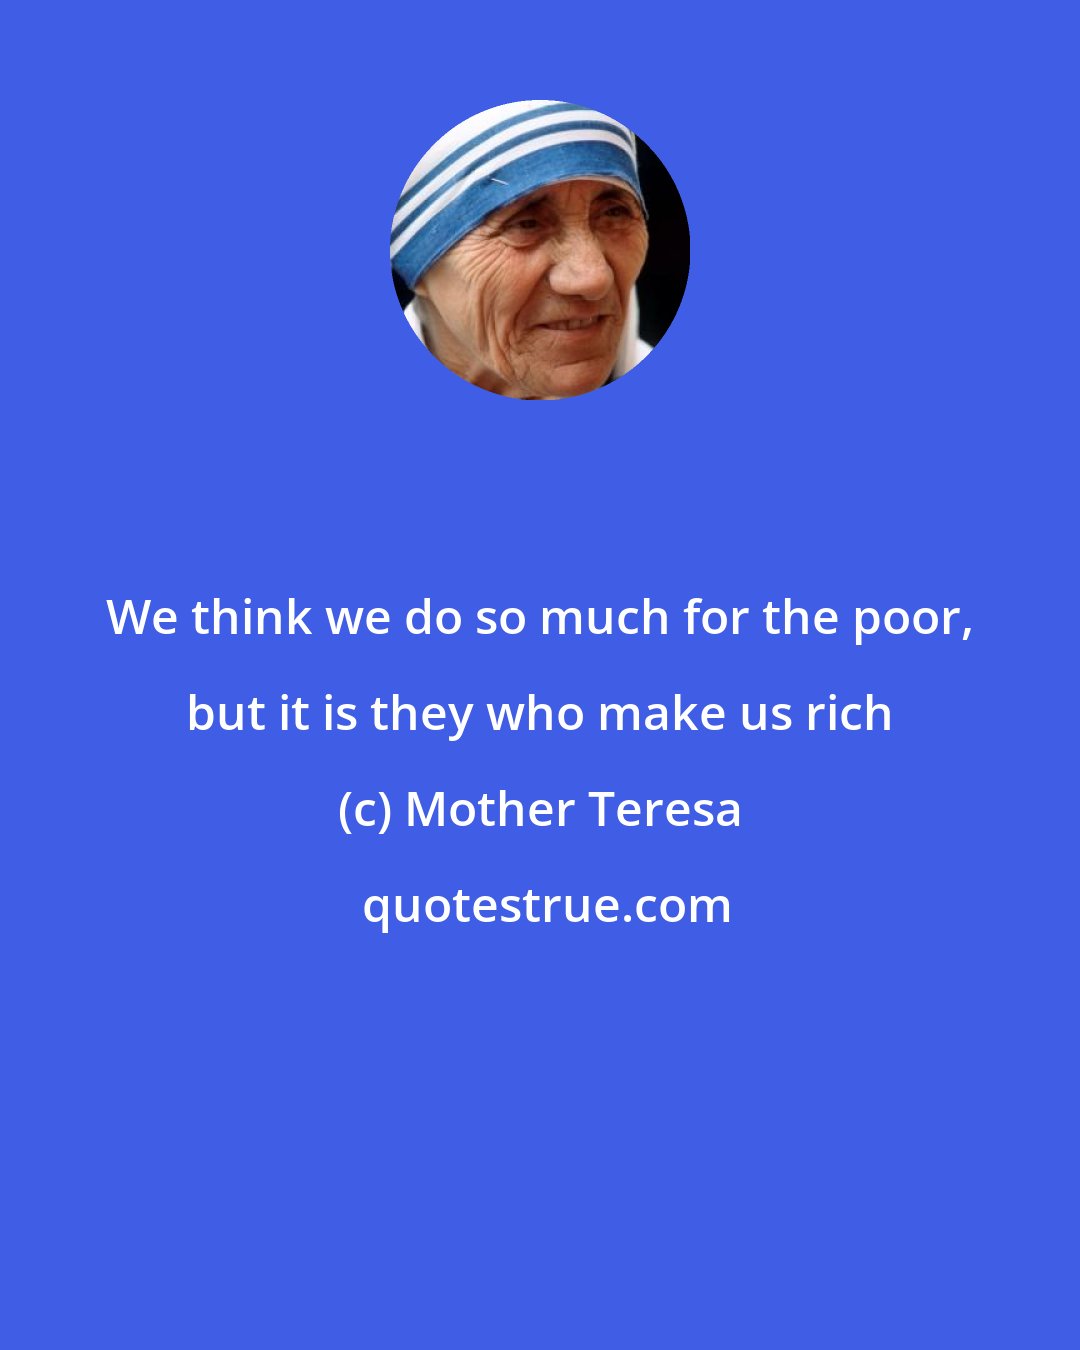 Mother Teresa: We think we do so much for the poor, but it is they who make us rich